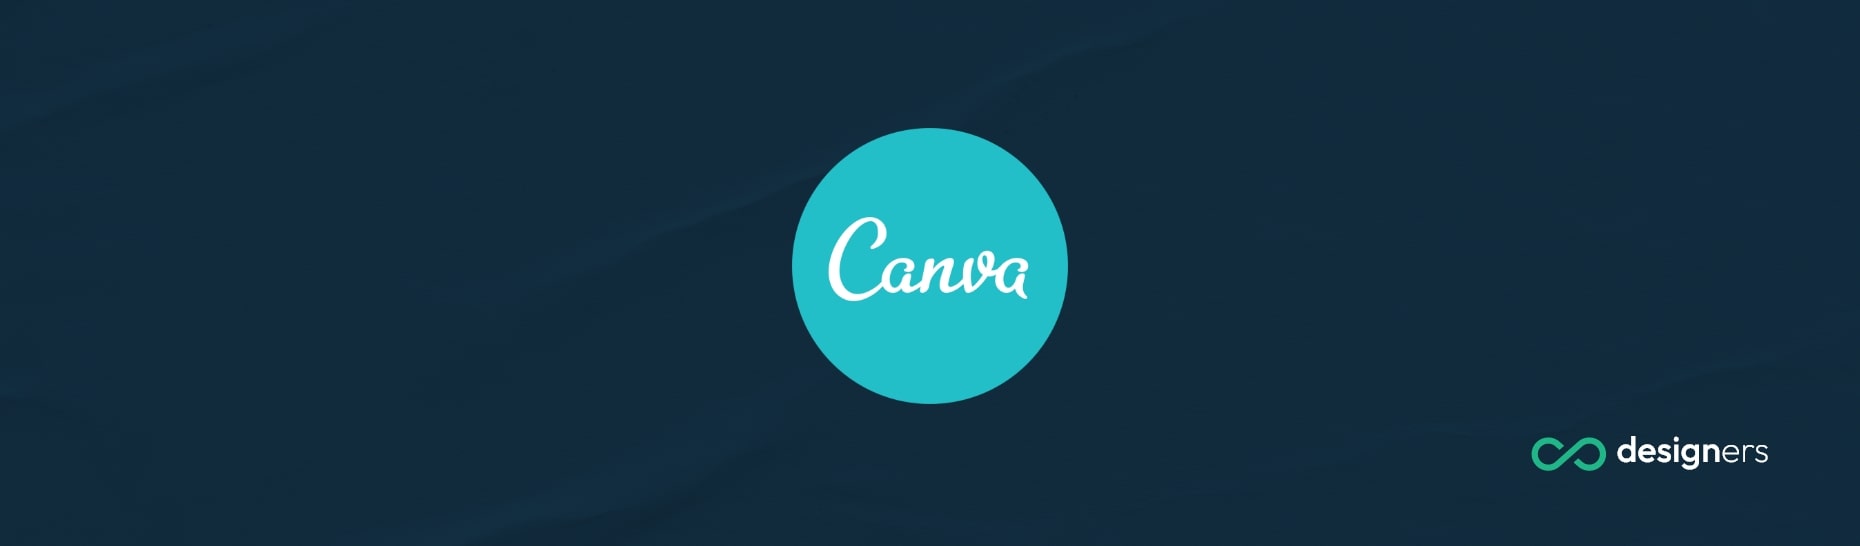 How Do I Use Pinterest Images in Canva? 